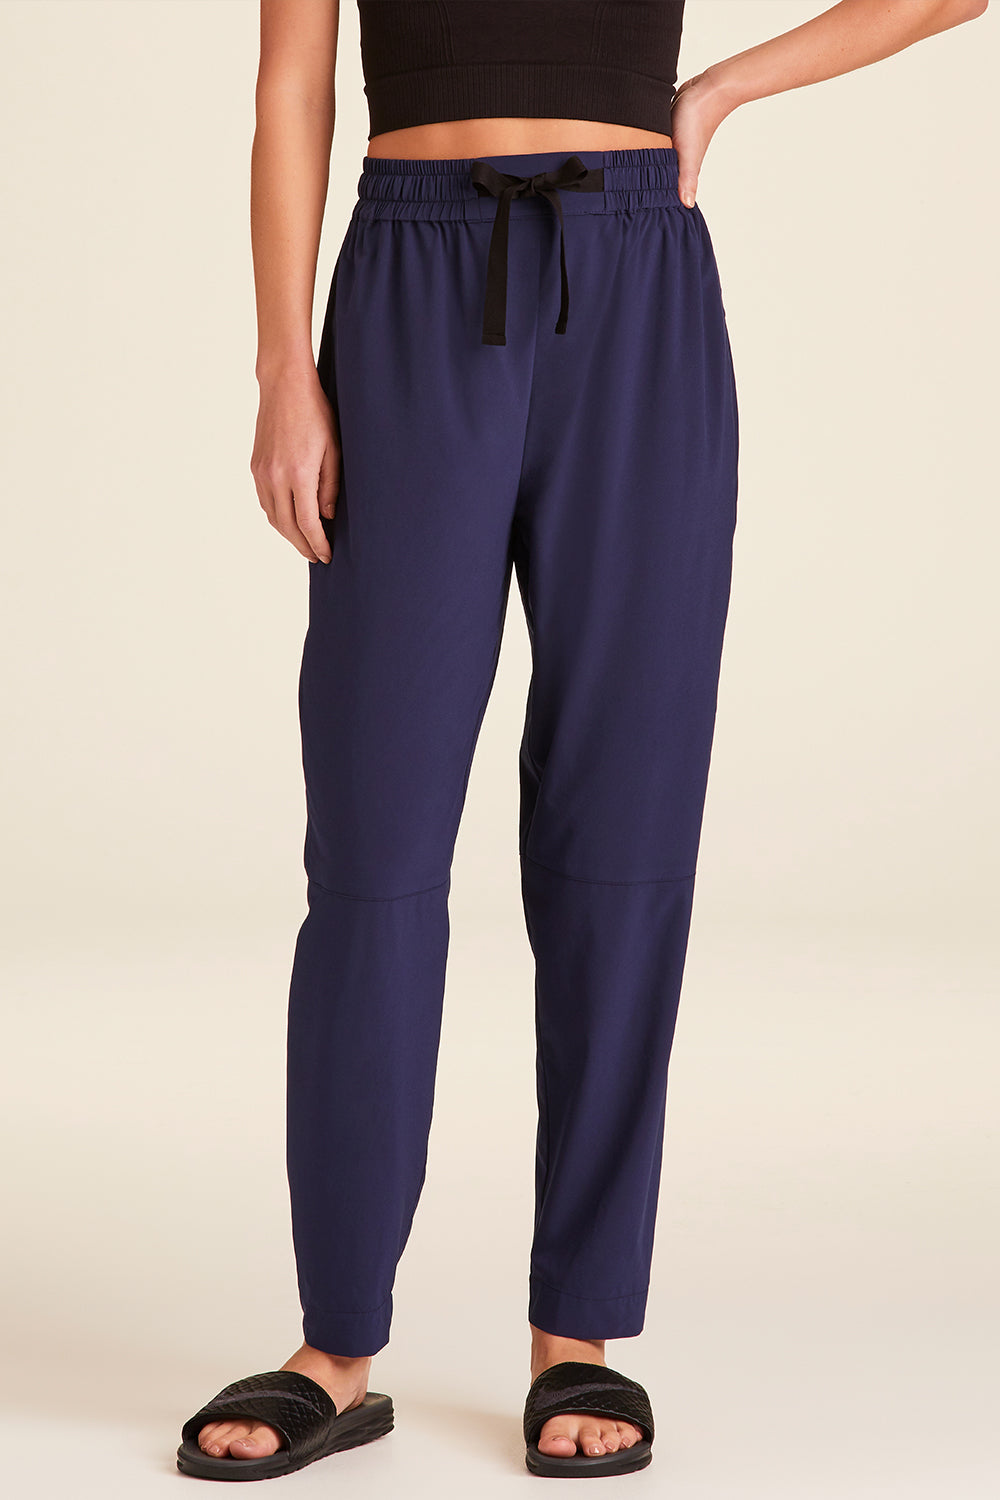 Front view of Alala Luxury Women's Athleisure commuter pant in navy